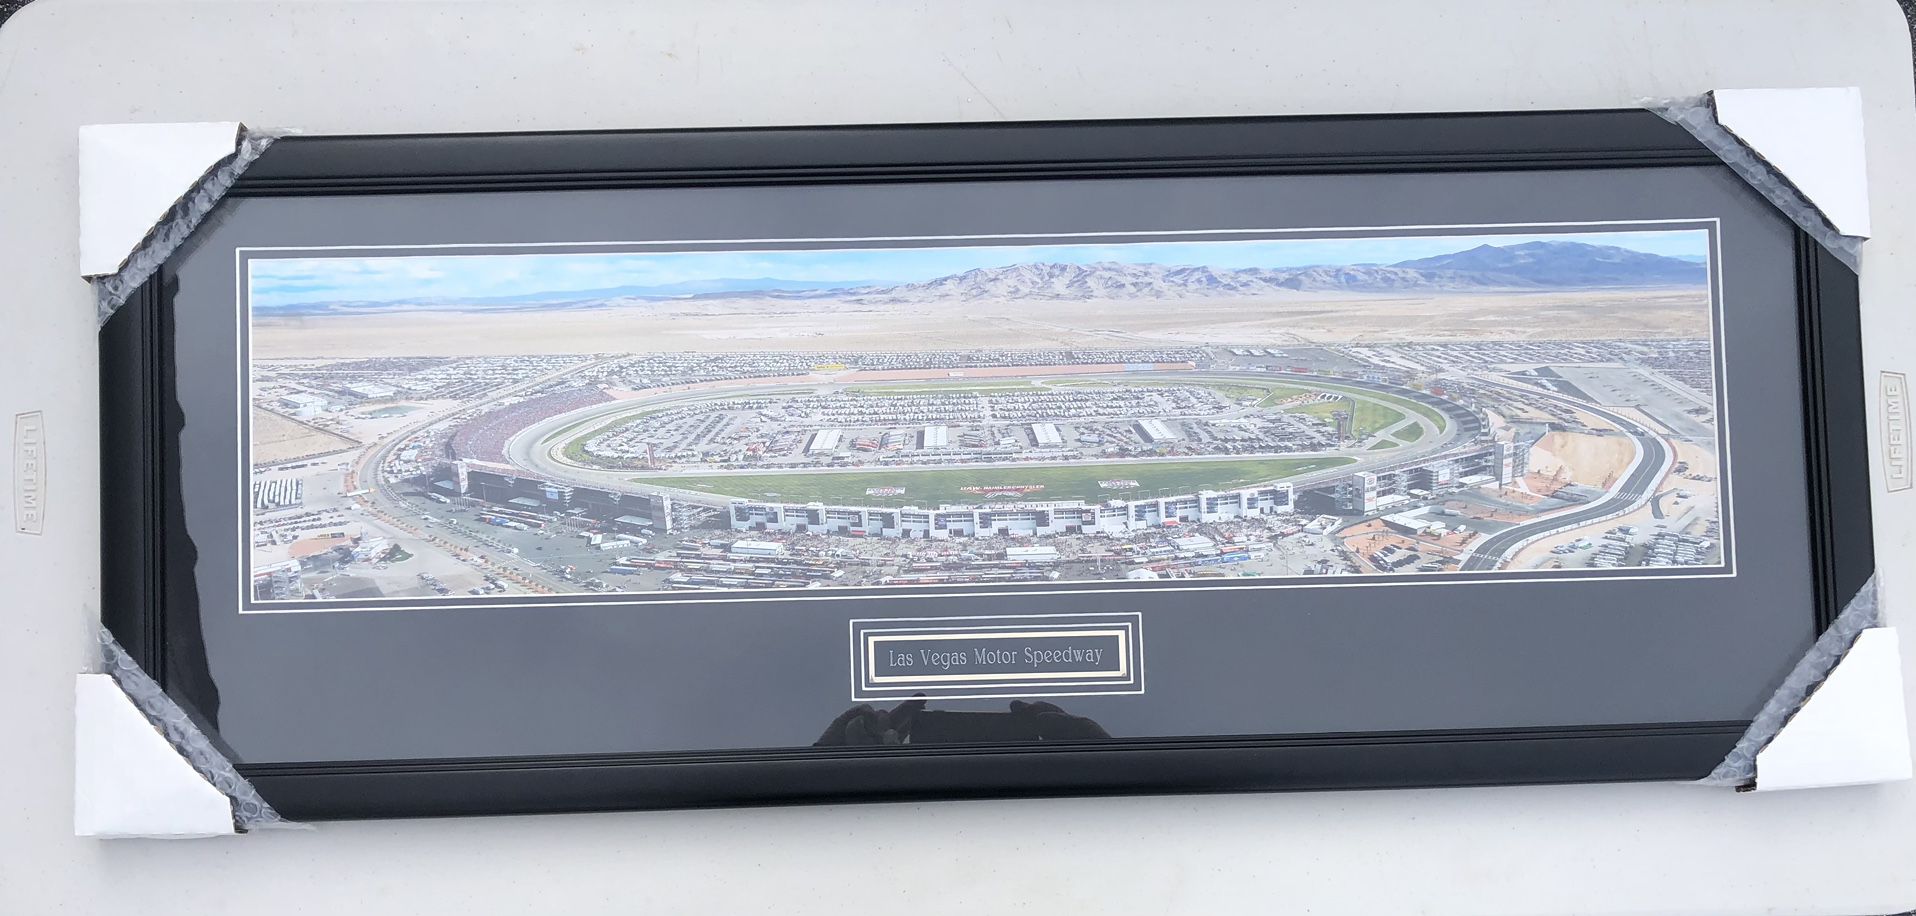 Picture Of The Famous Las Vegas Motor Speedway